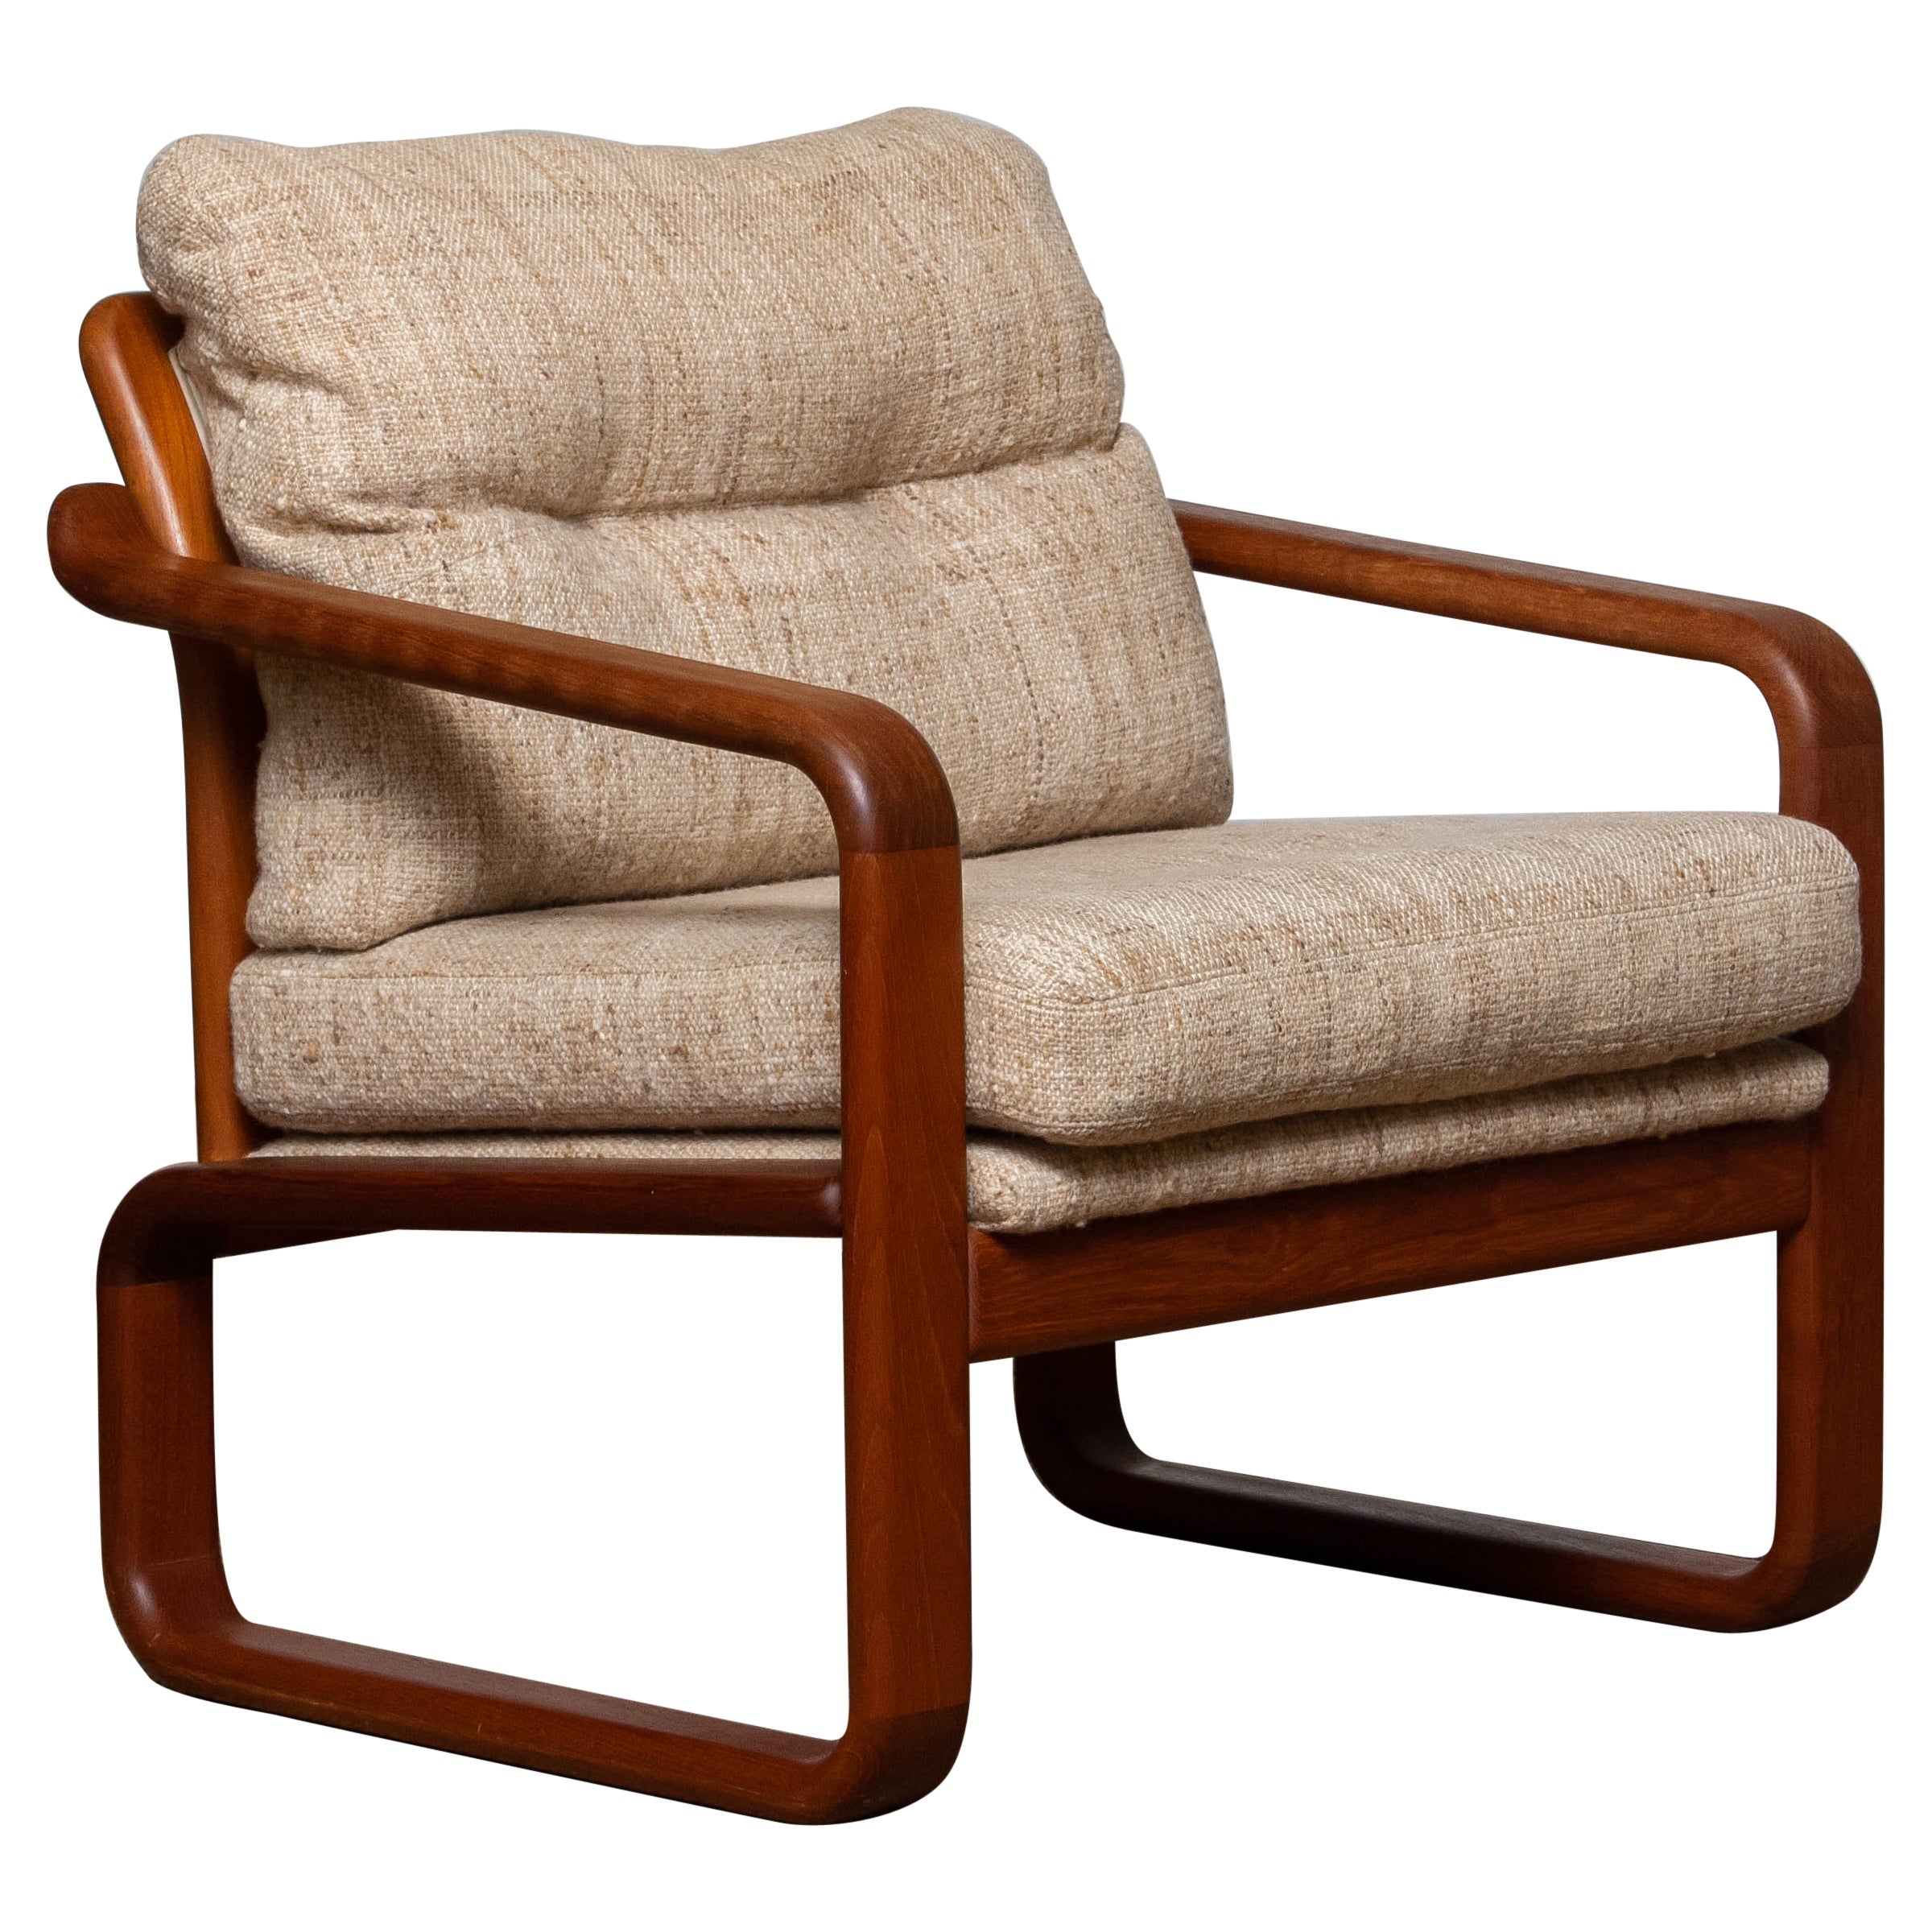 1980's Teak with Wool Cushions Lounge / Easy / Club Chair by HS Design  Denmark For Sale at 1stDibs | 1980s chair